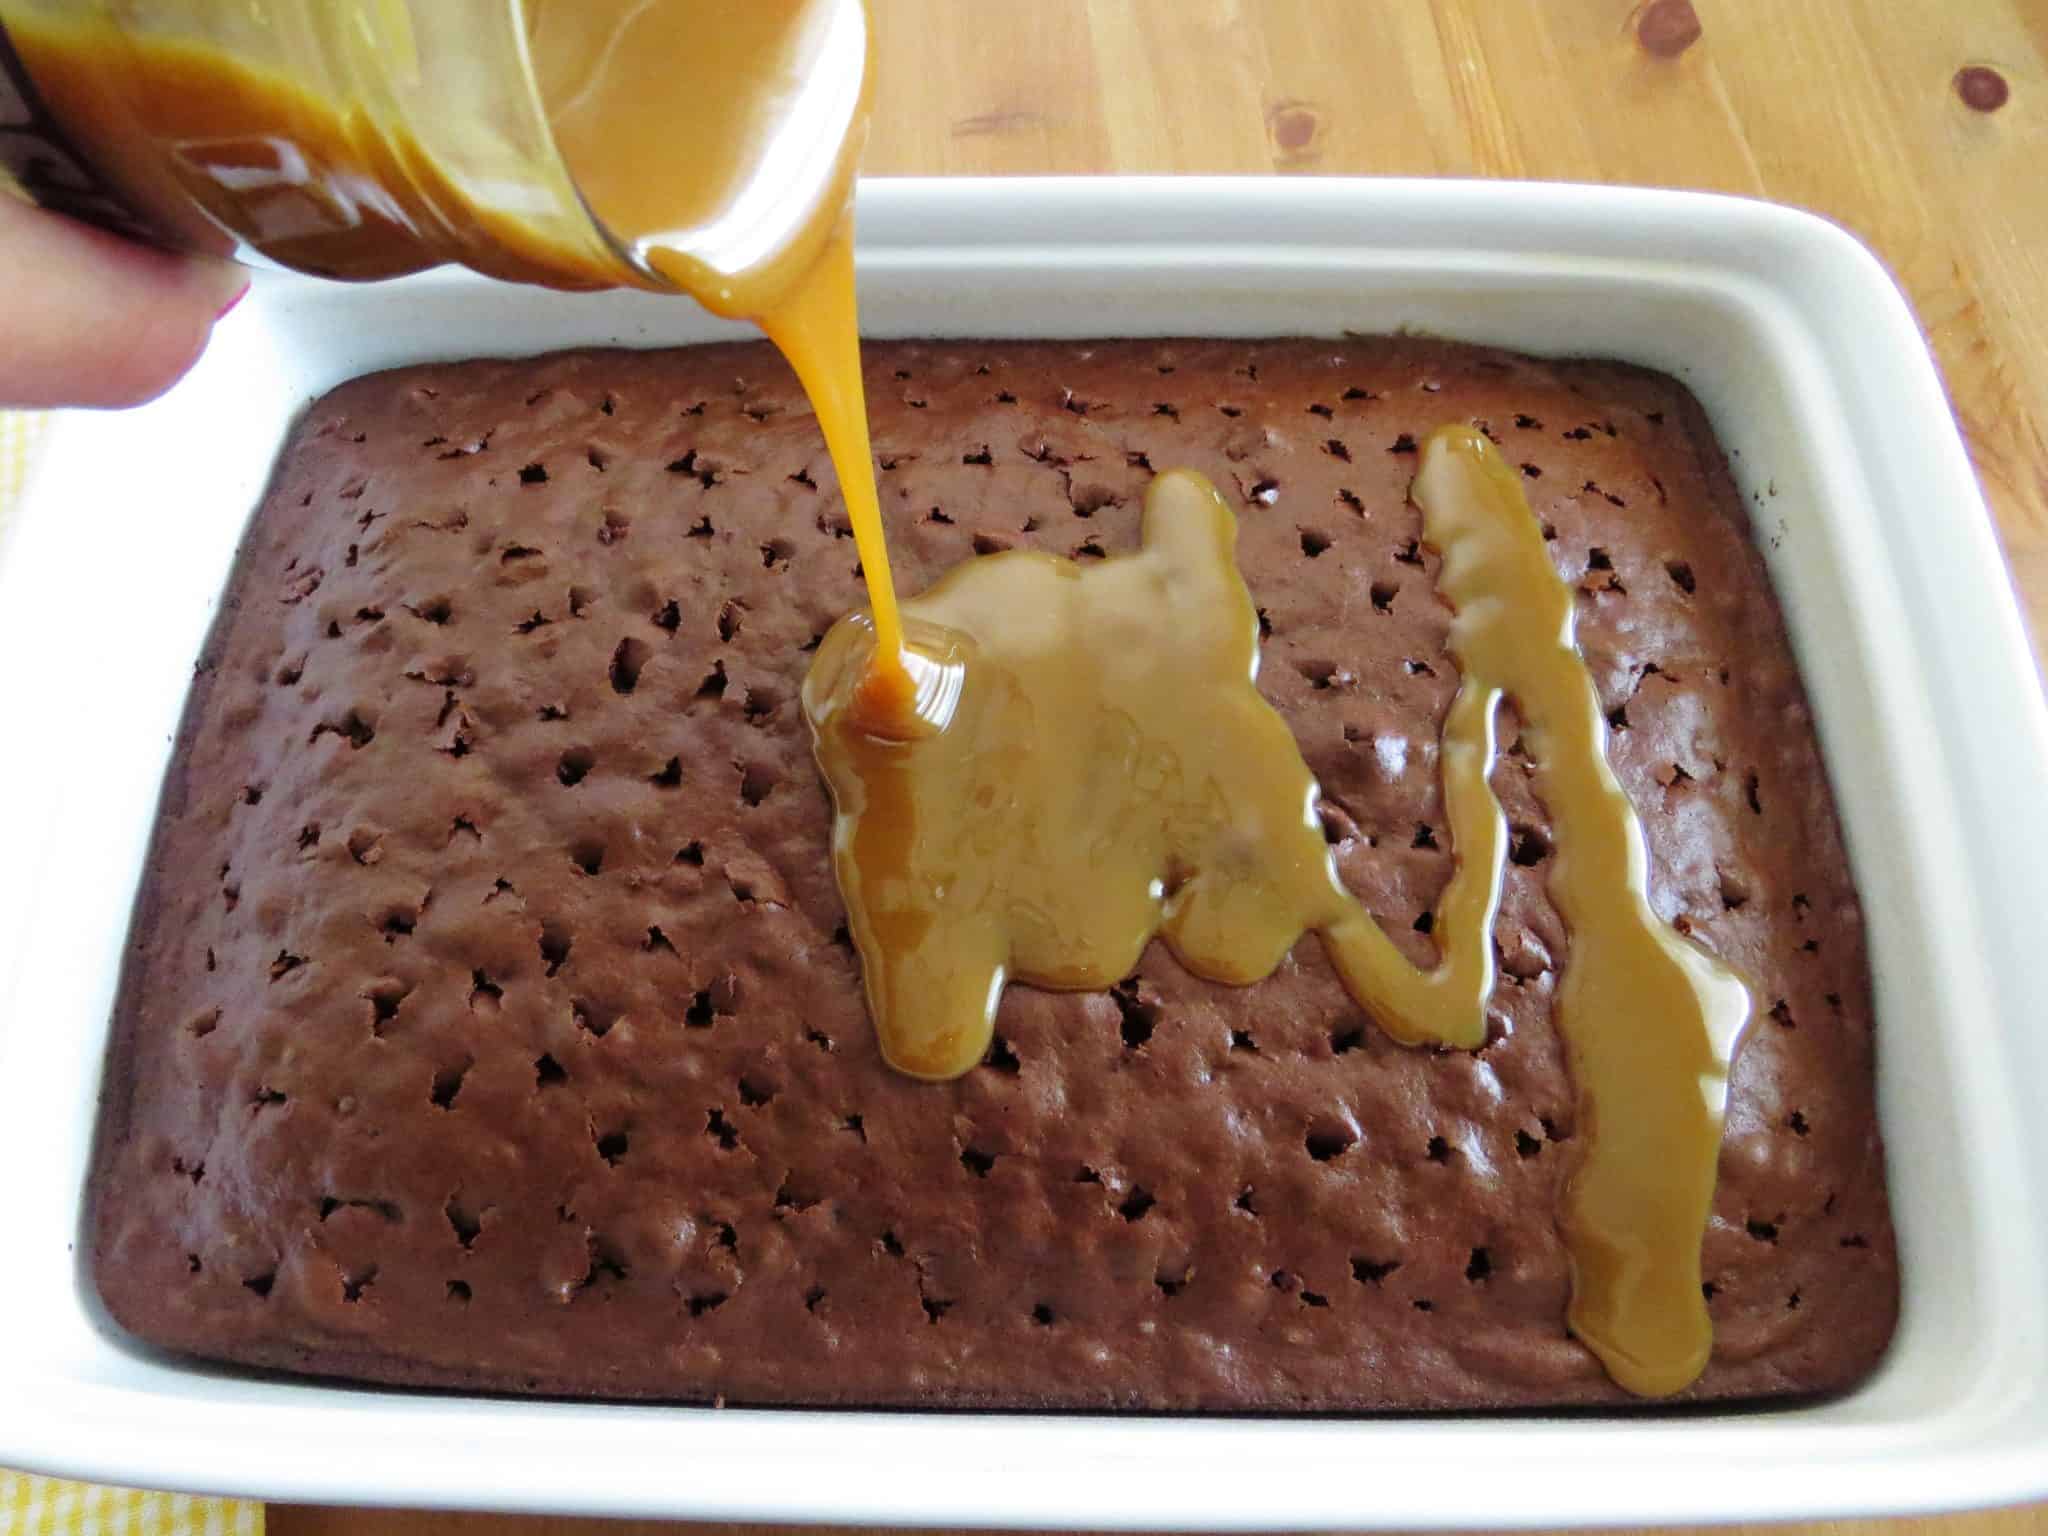 pouring jarred caramel sauce over warm chocolate cake.